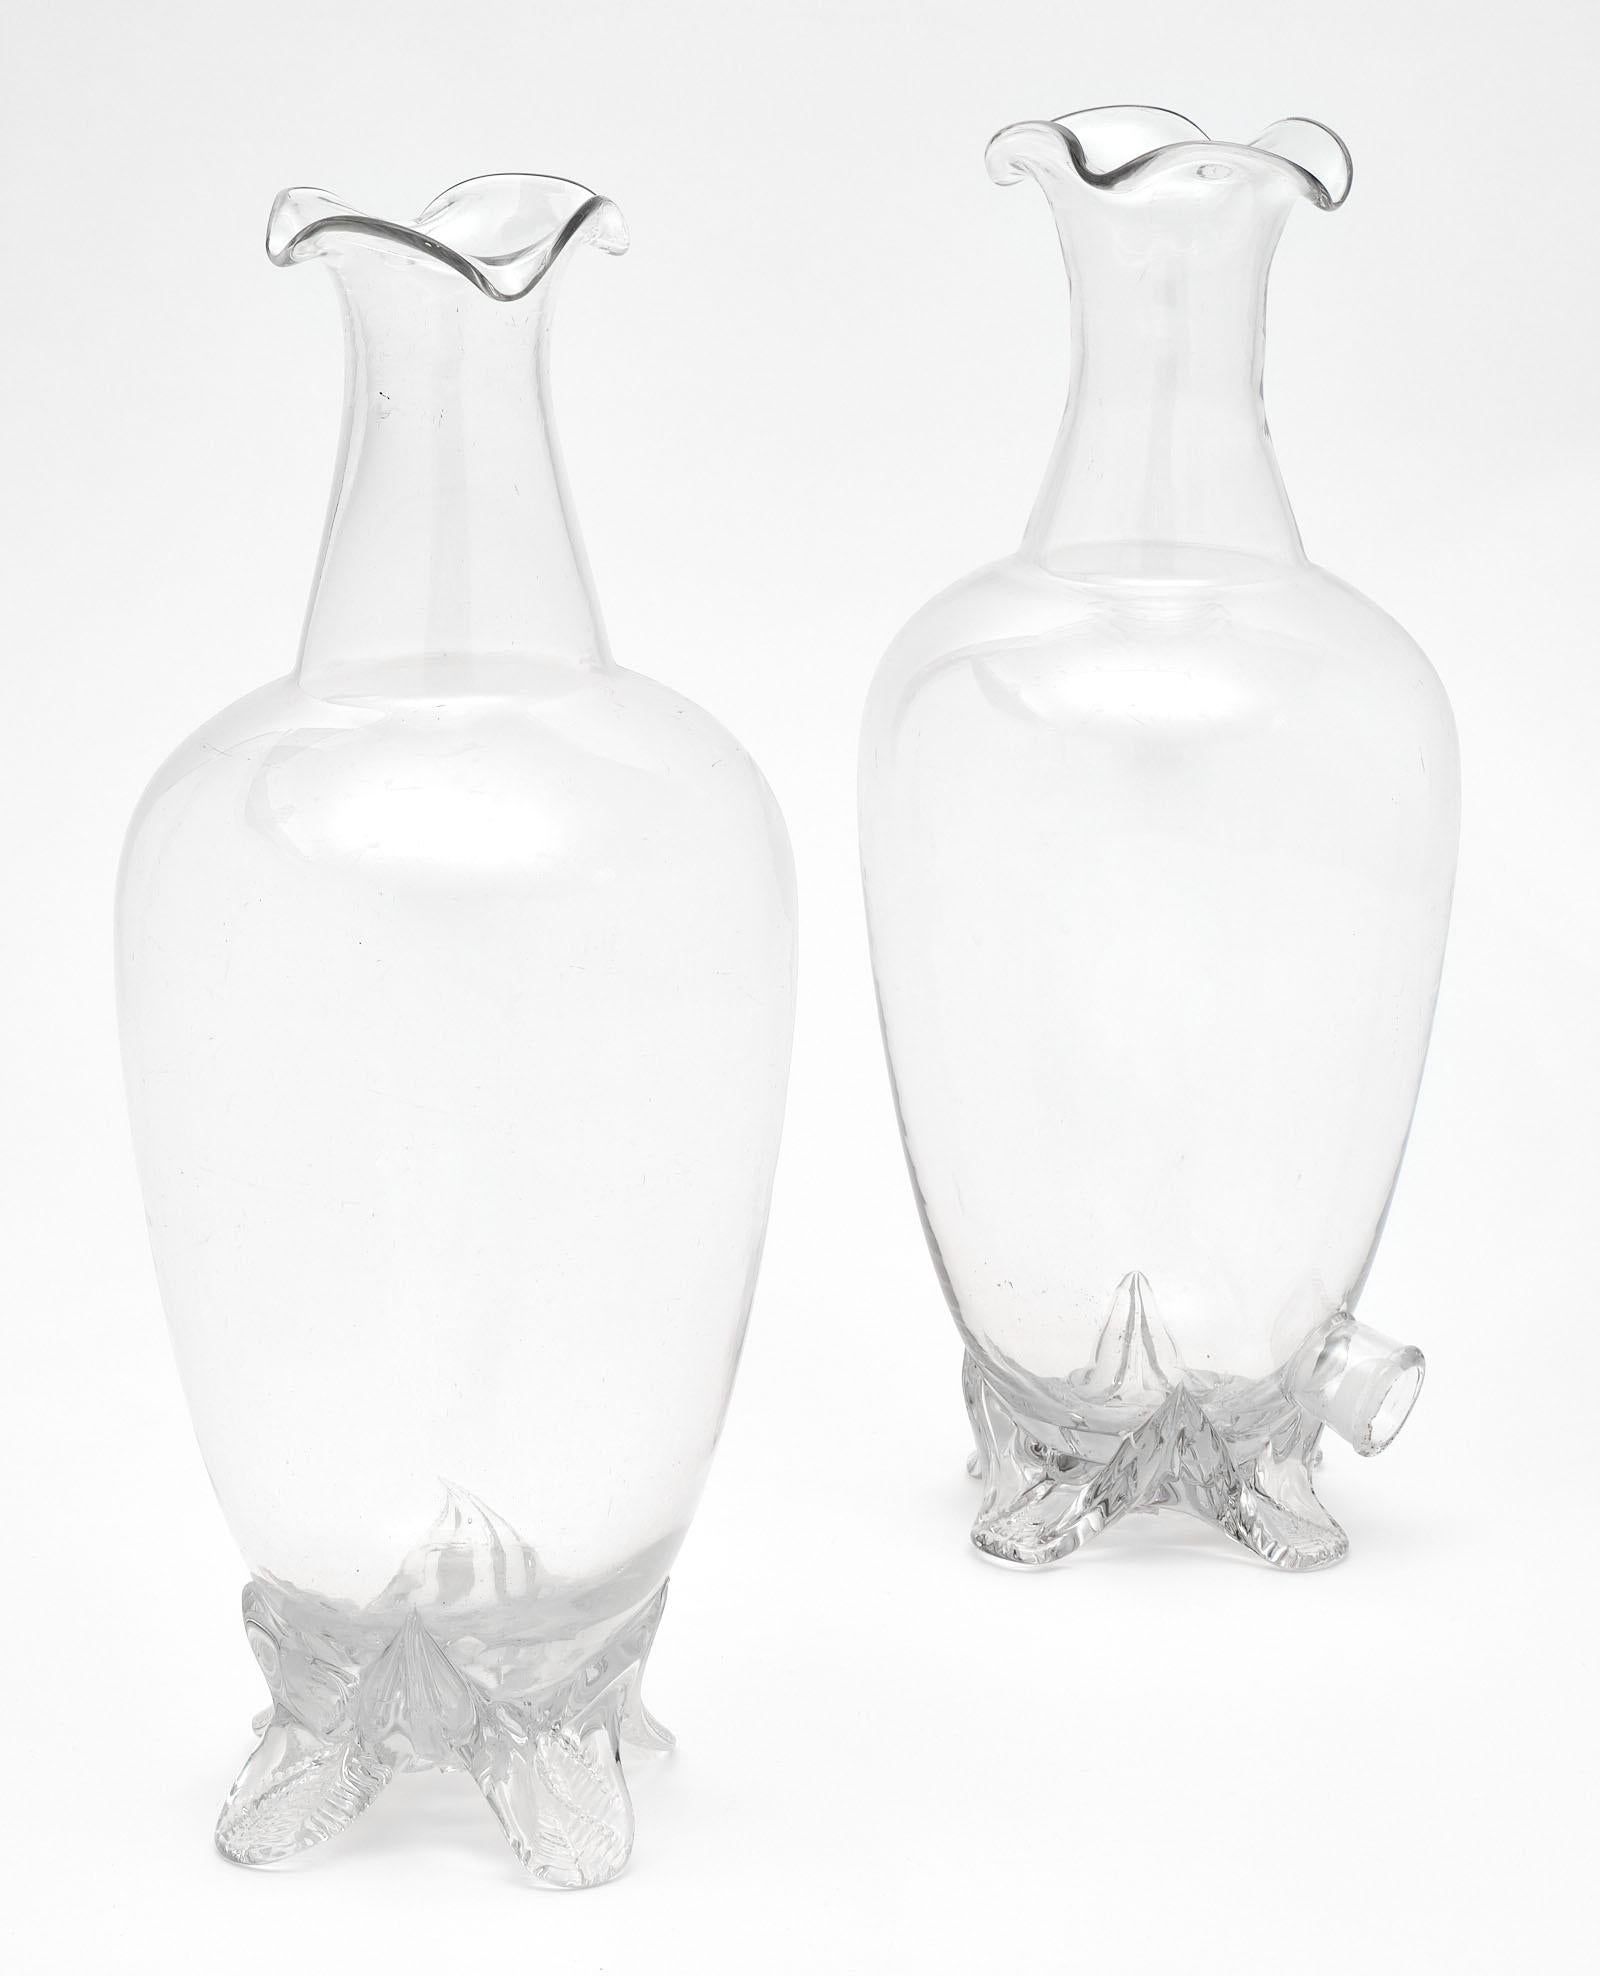 A pair of antique French perfume bottles from Maison Molinard in Grasse next to Nice. One of the bottles has a spigot at the bottom as well.